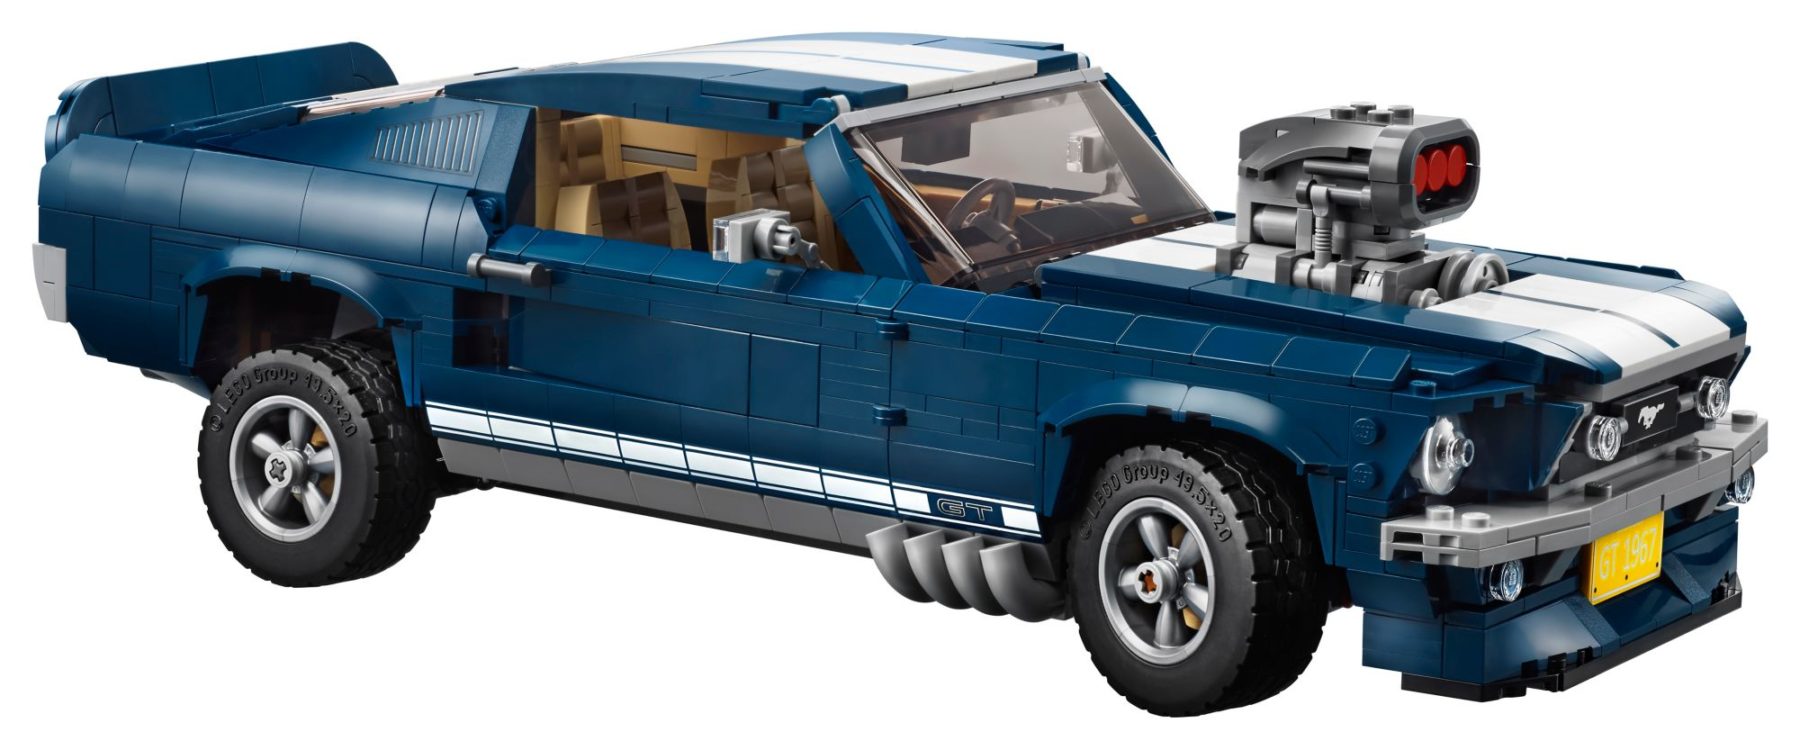 LEGO 10265 Ford Mustang GT mit allen Modifikationen